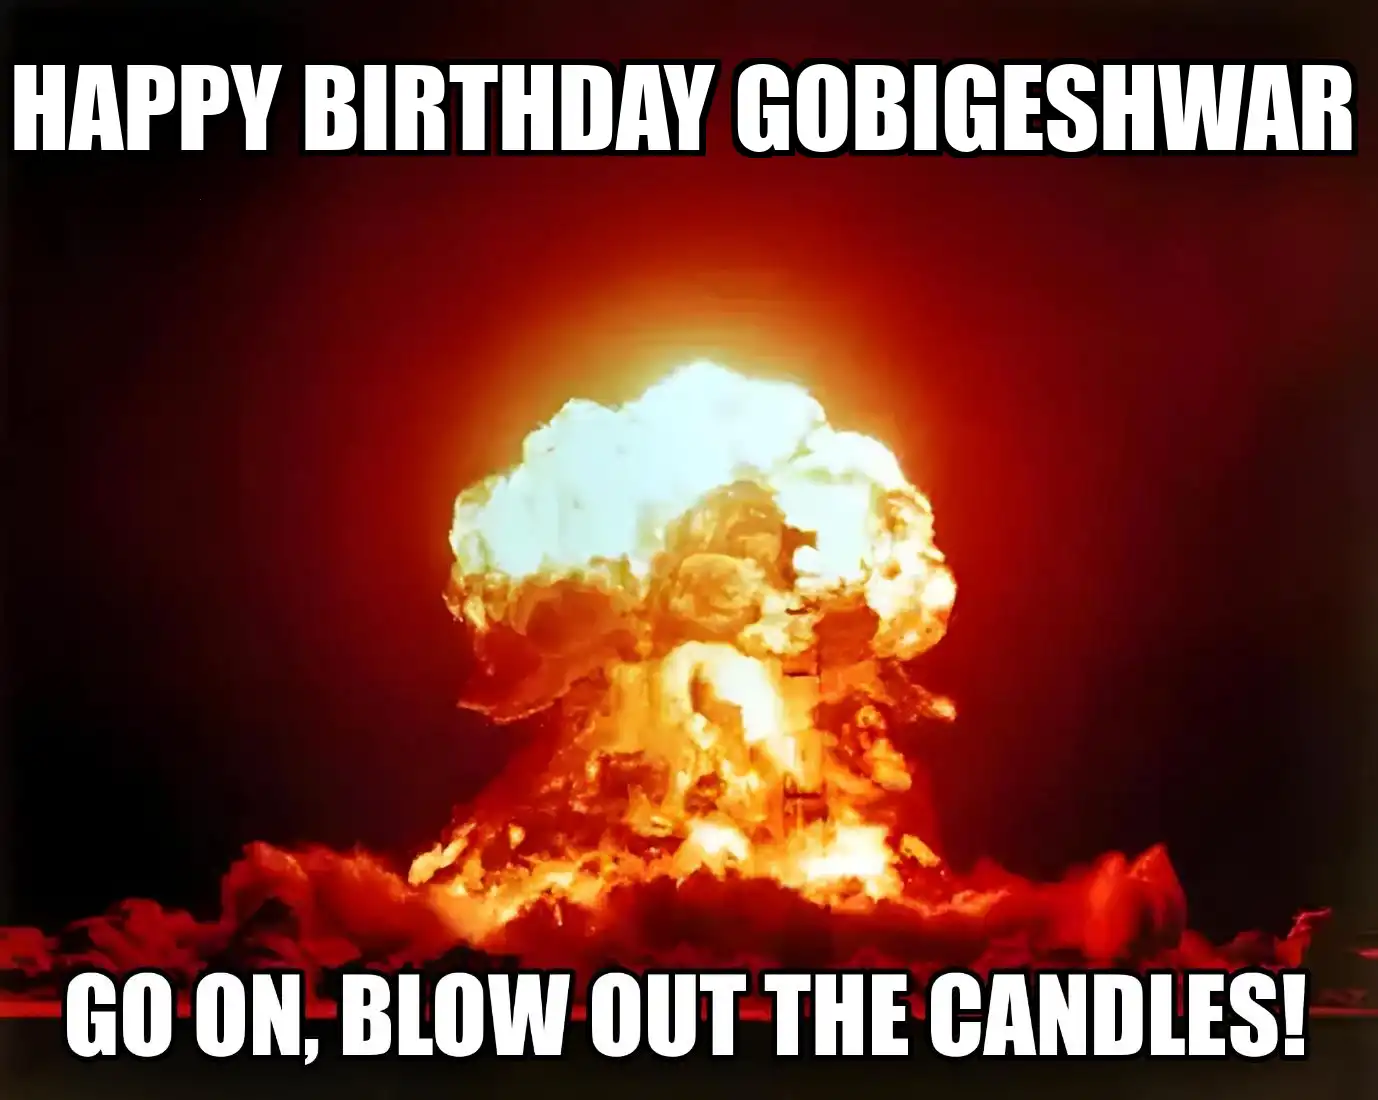 Happy Birthday Gobigeshwar Go On Blow Out The Candles Meme